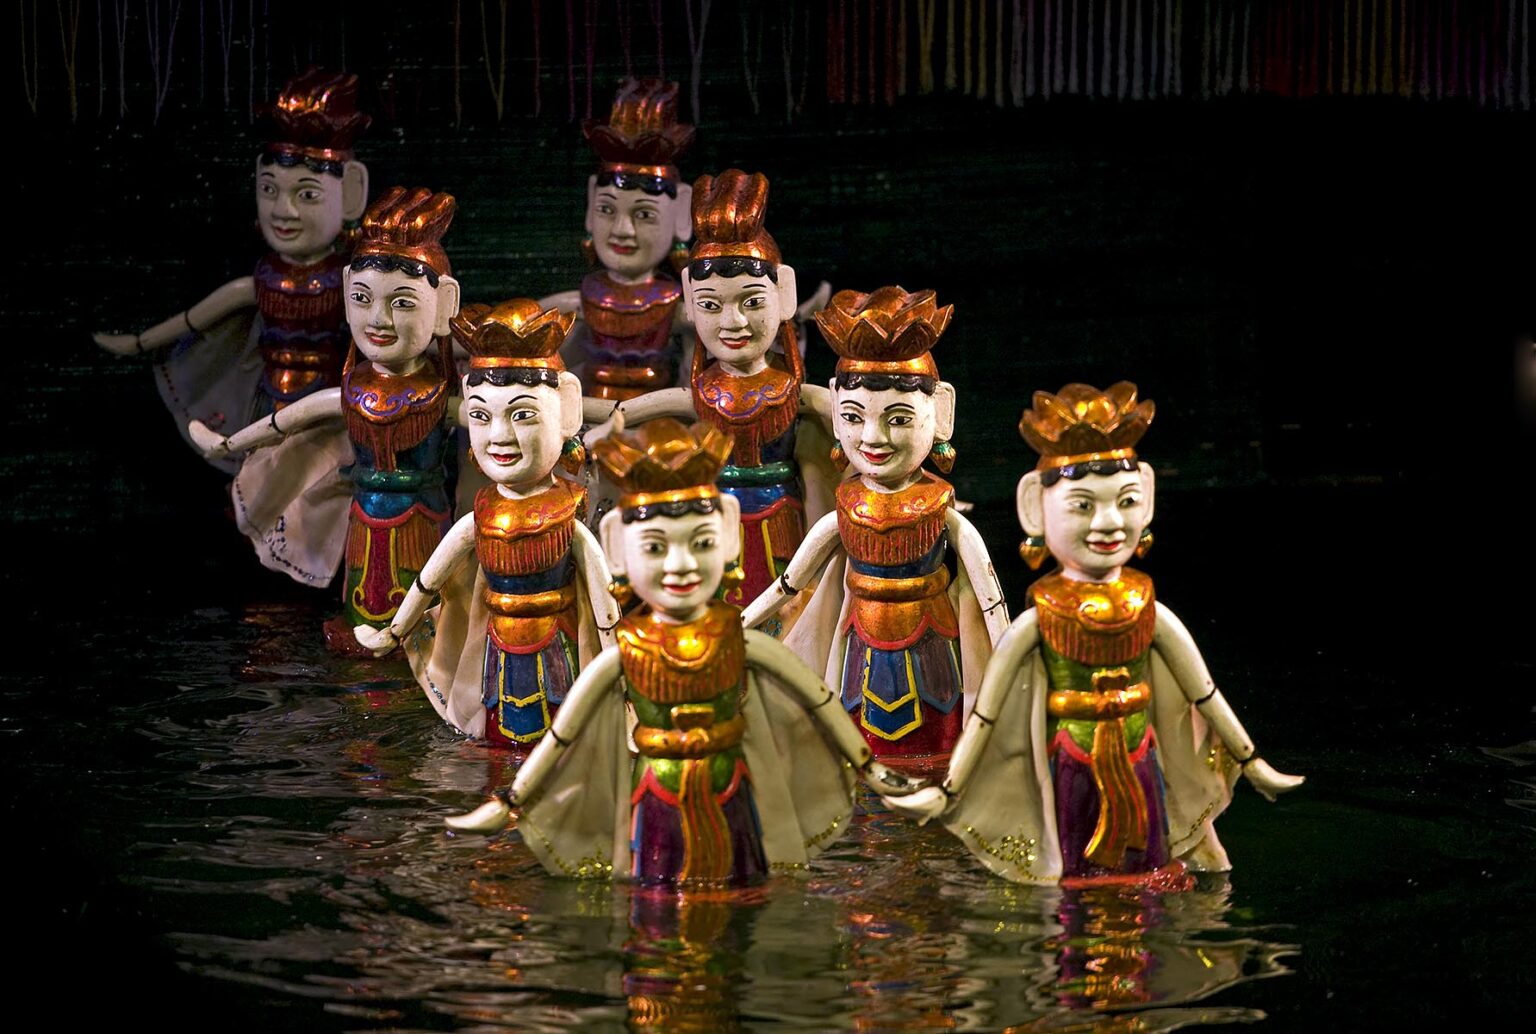 Dancing women during the performance at the THANG LONG WATER PUPPET THEATRE - HANOI, VIETNAM